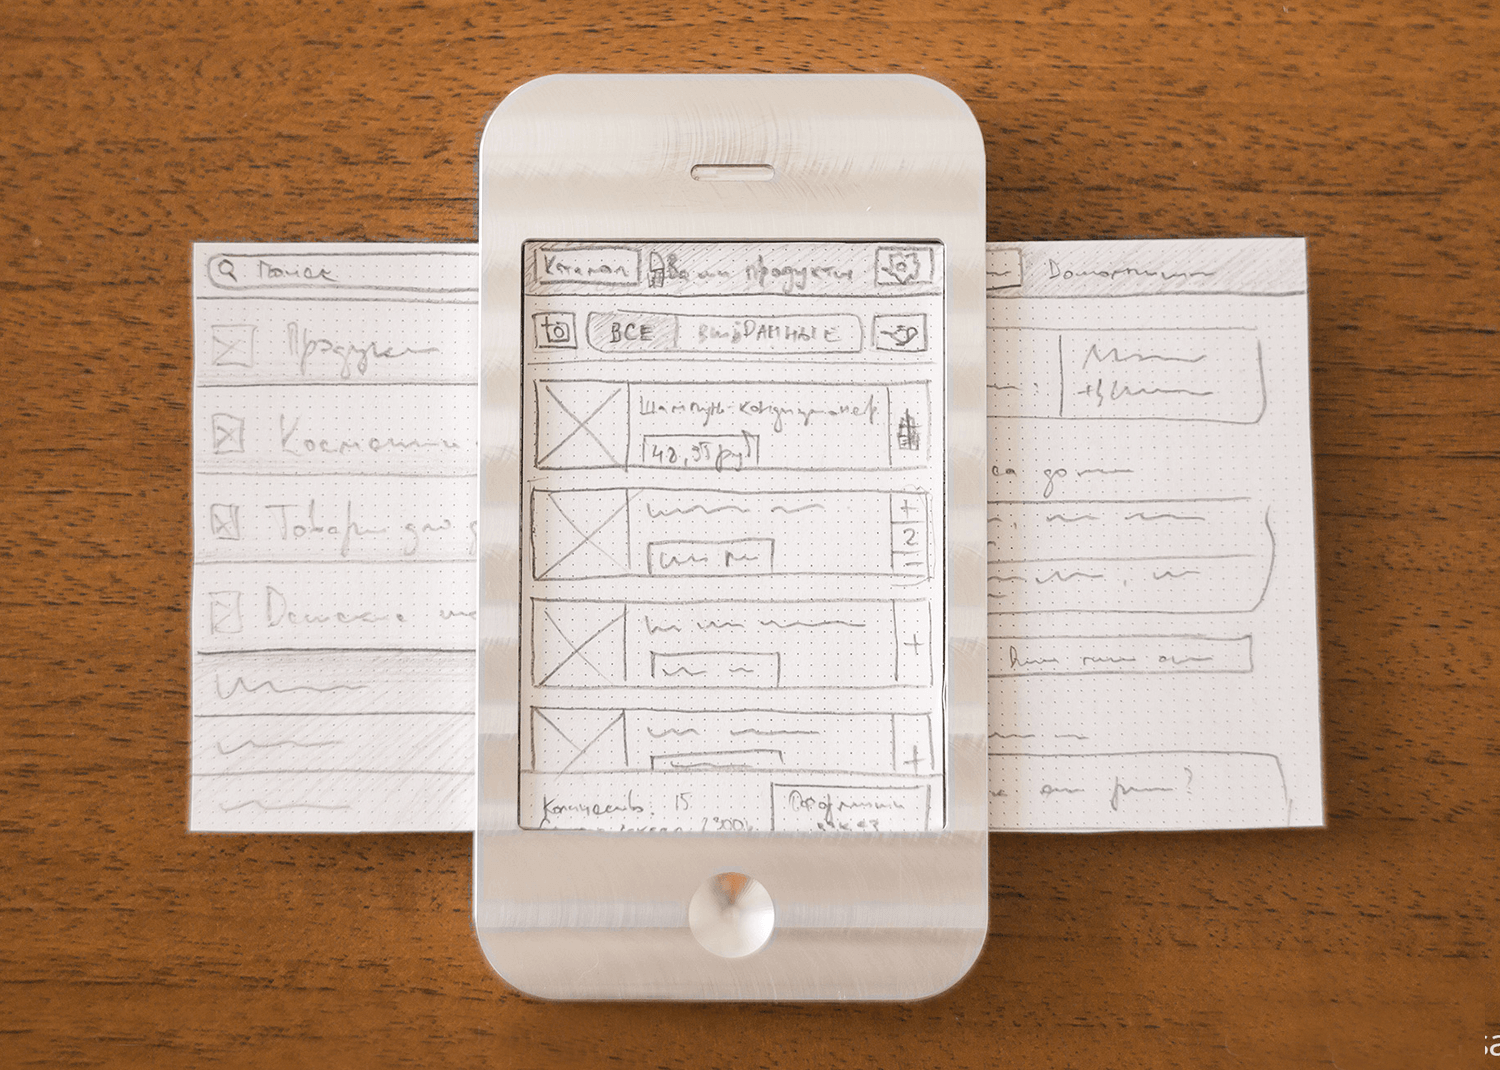 Paper prototyping with iPhone molds